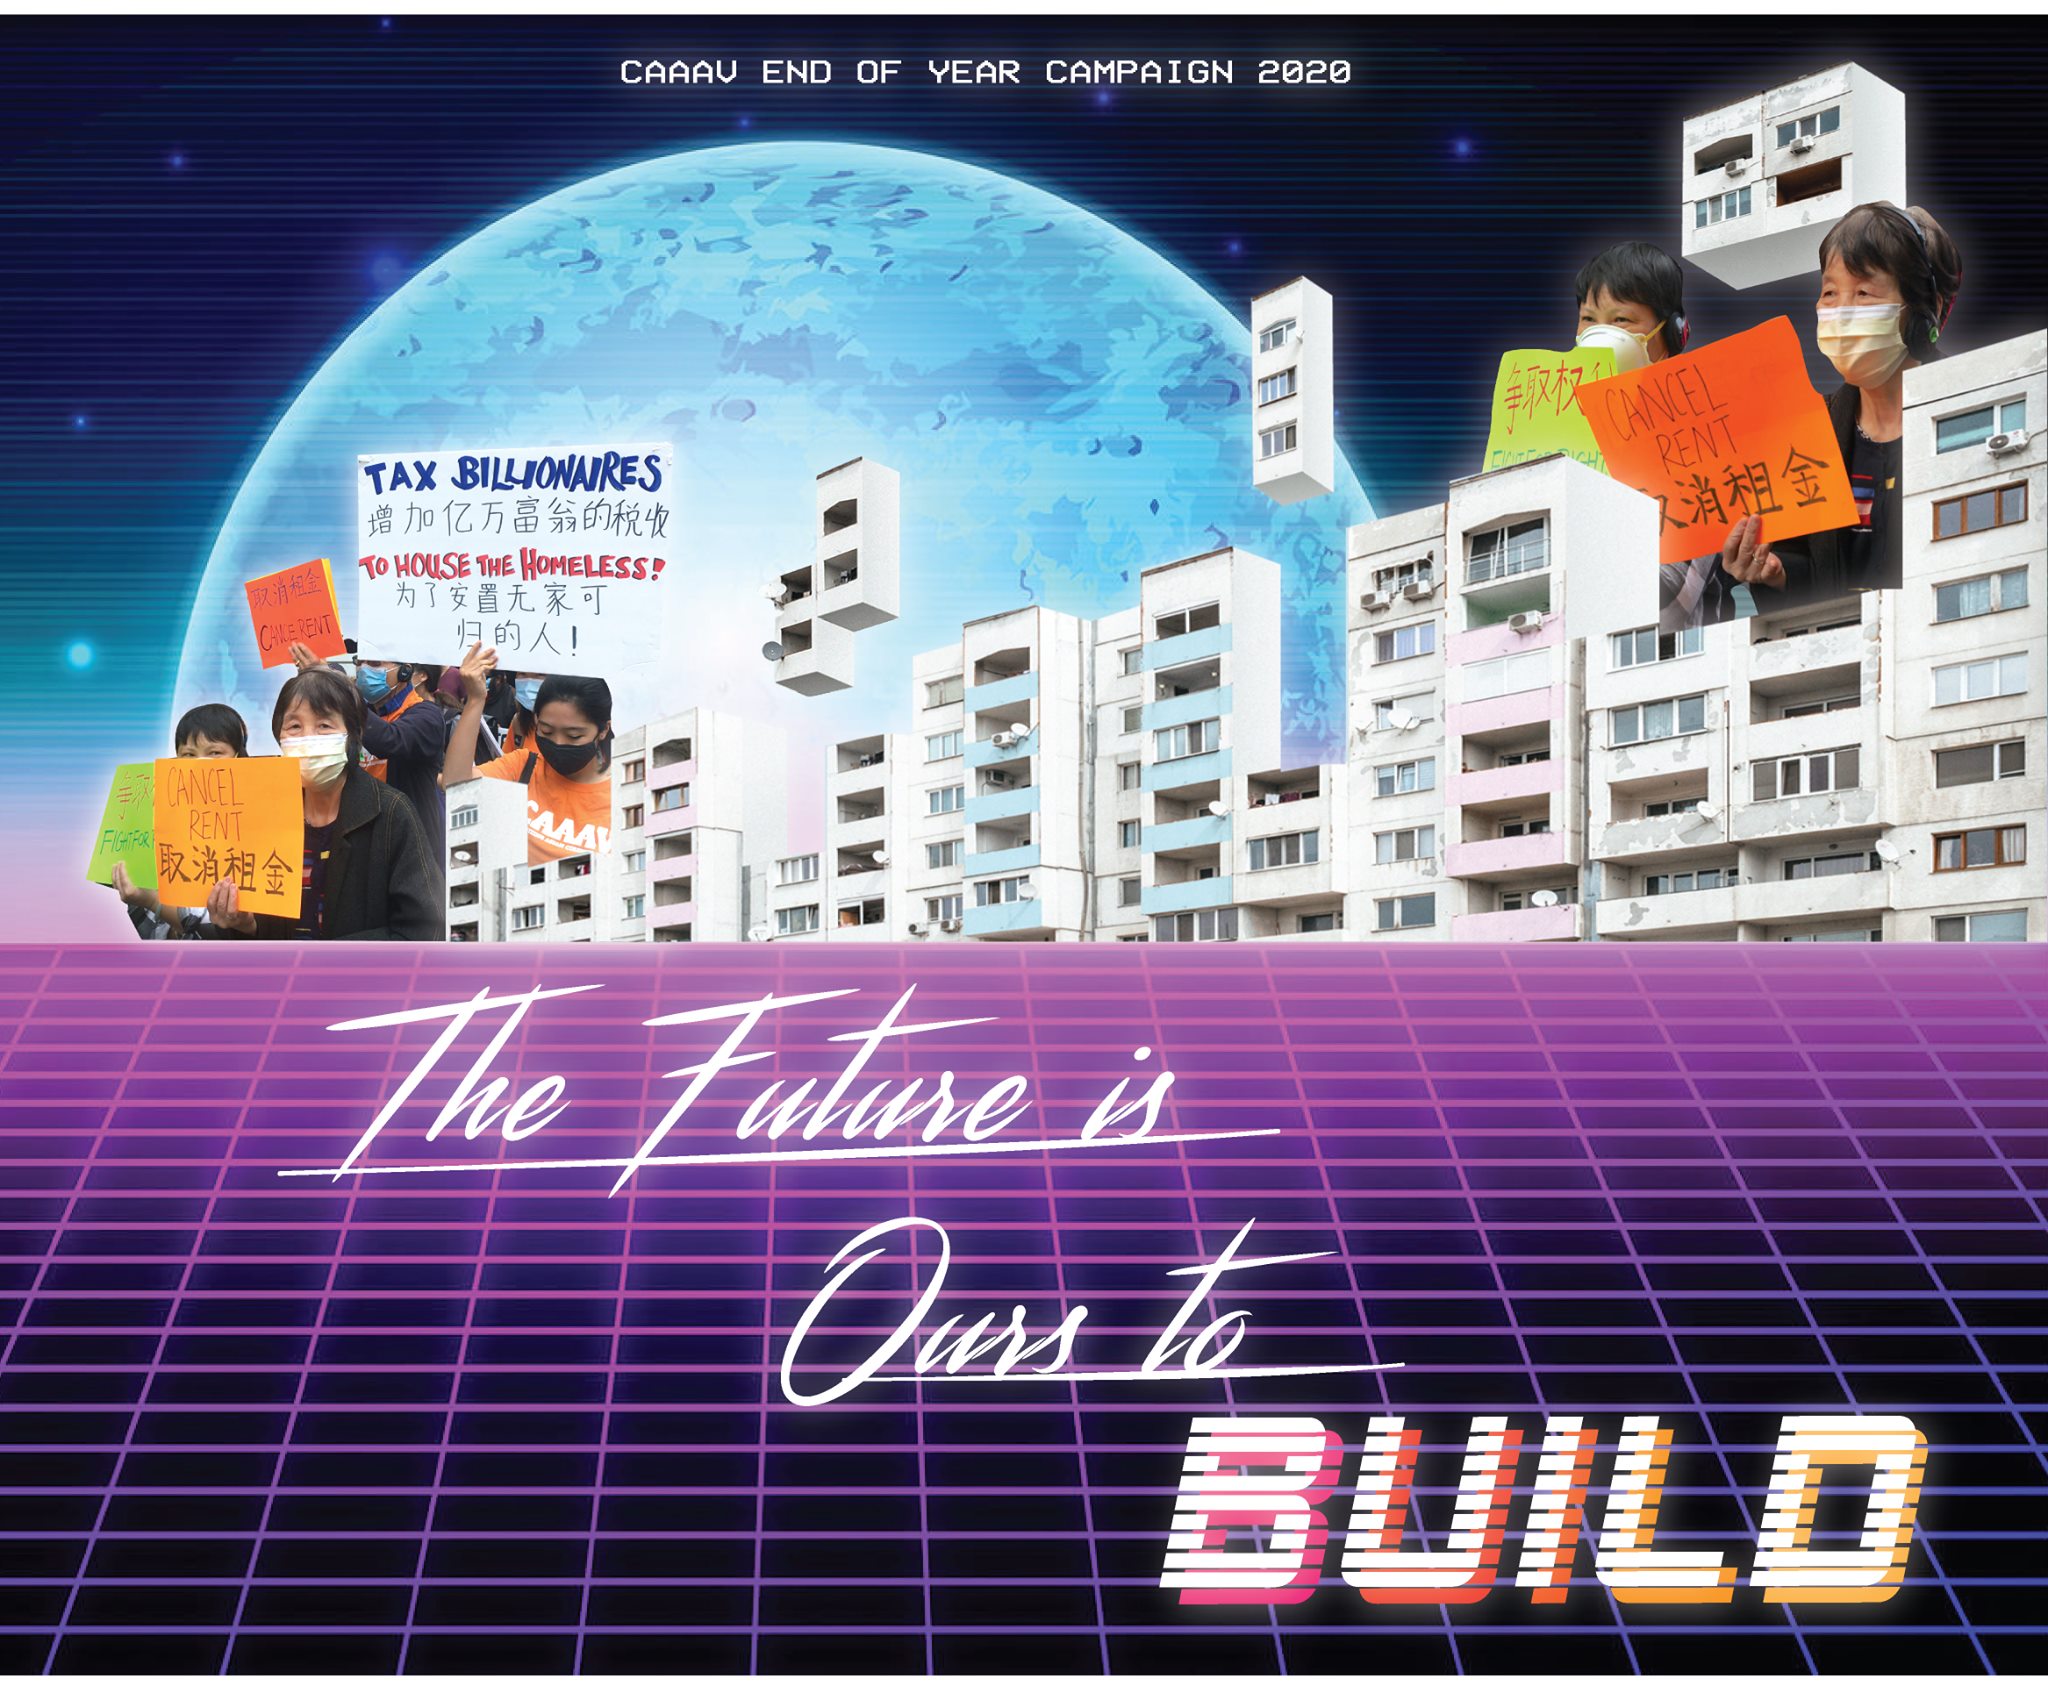 CAAAV’s The Future is Ours To Build fundraiser!